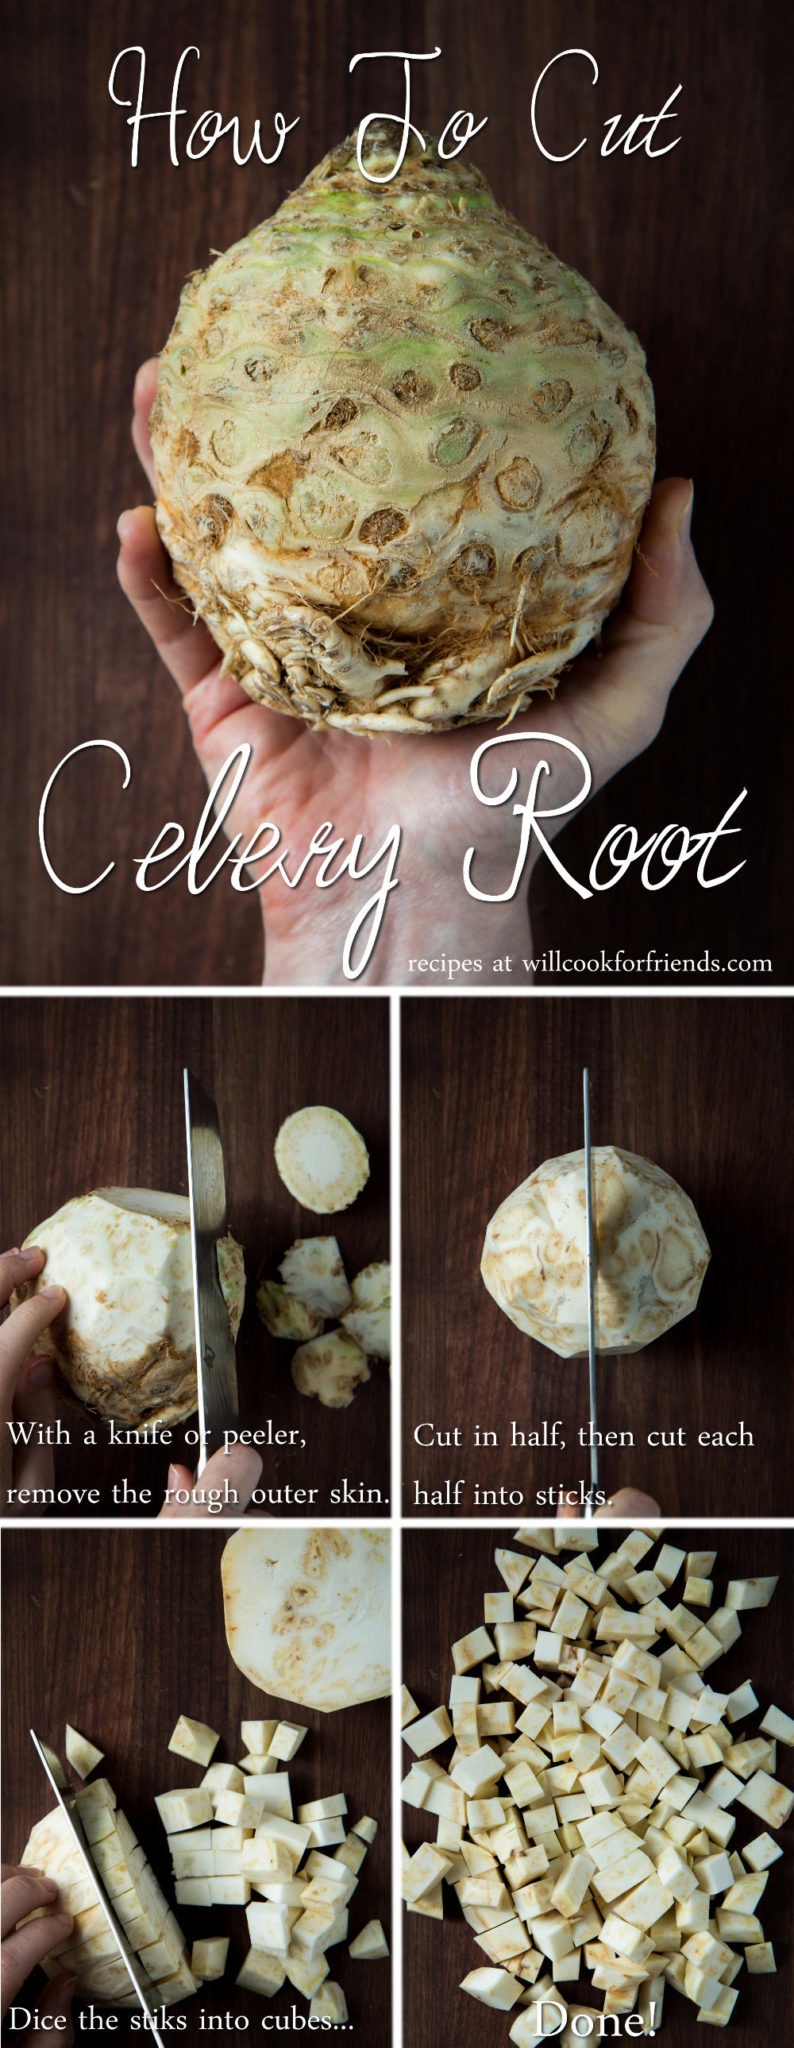 How To Cut Celery Root, web file